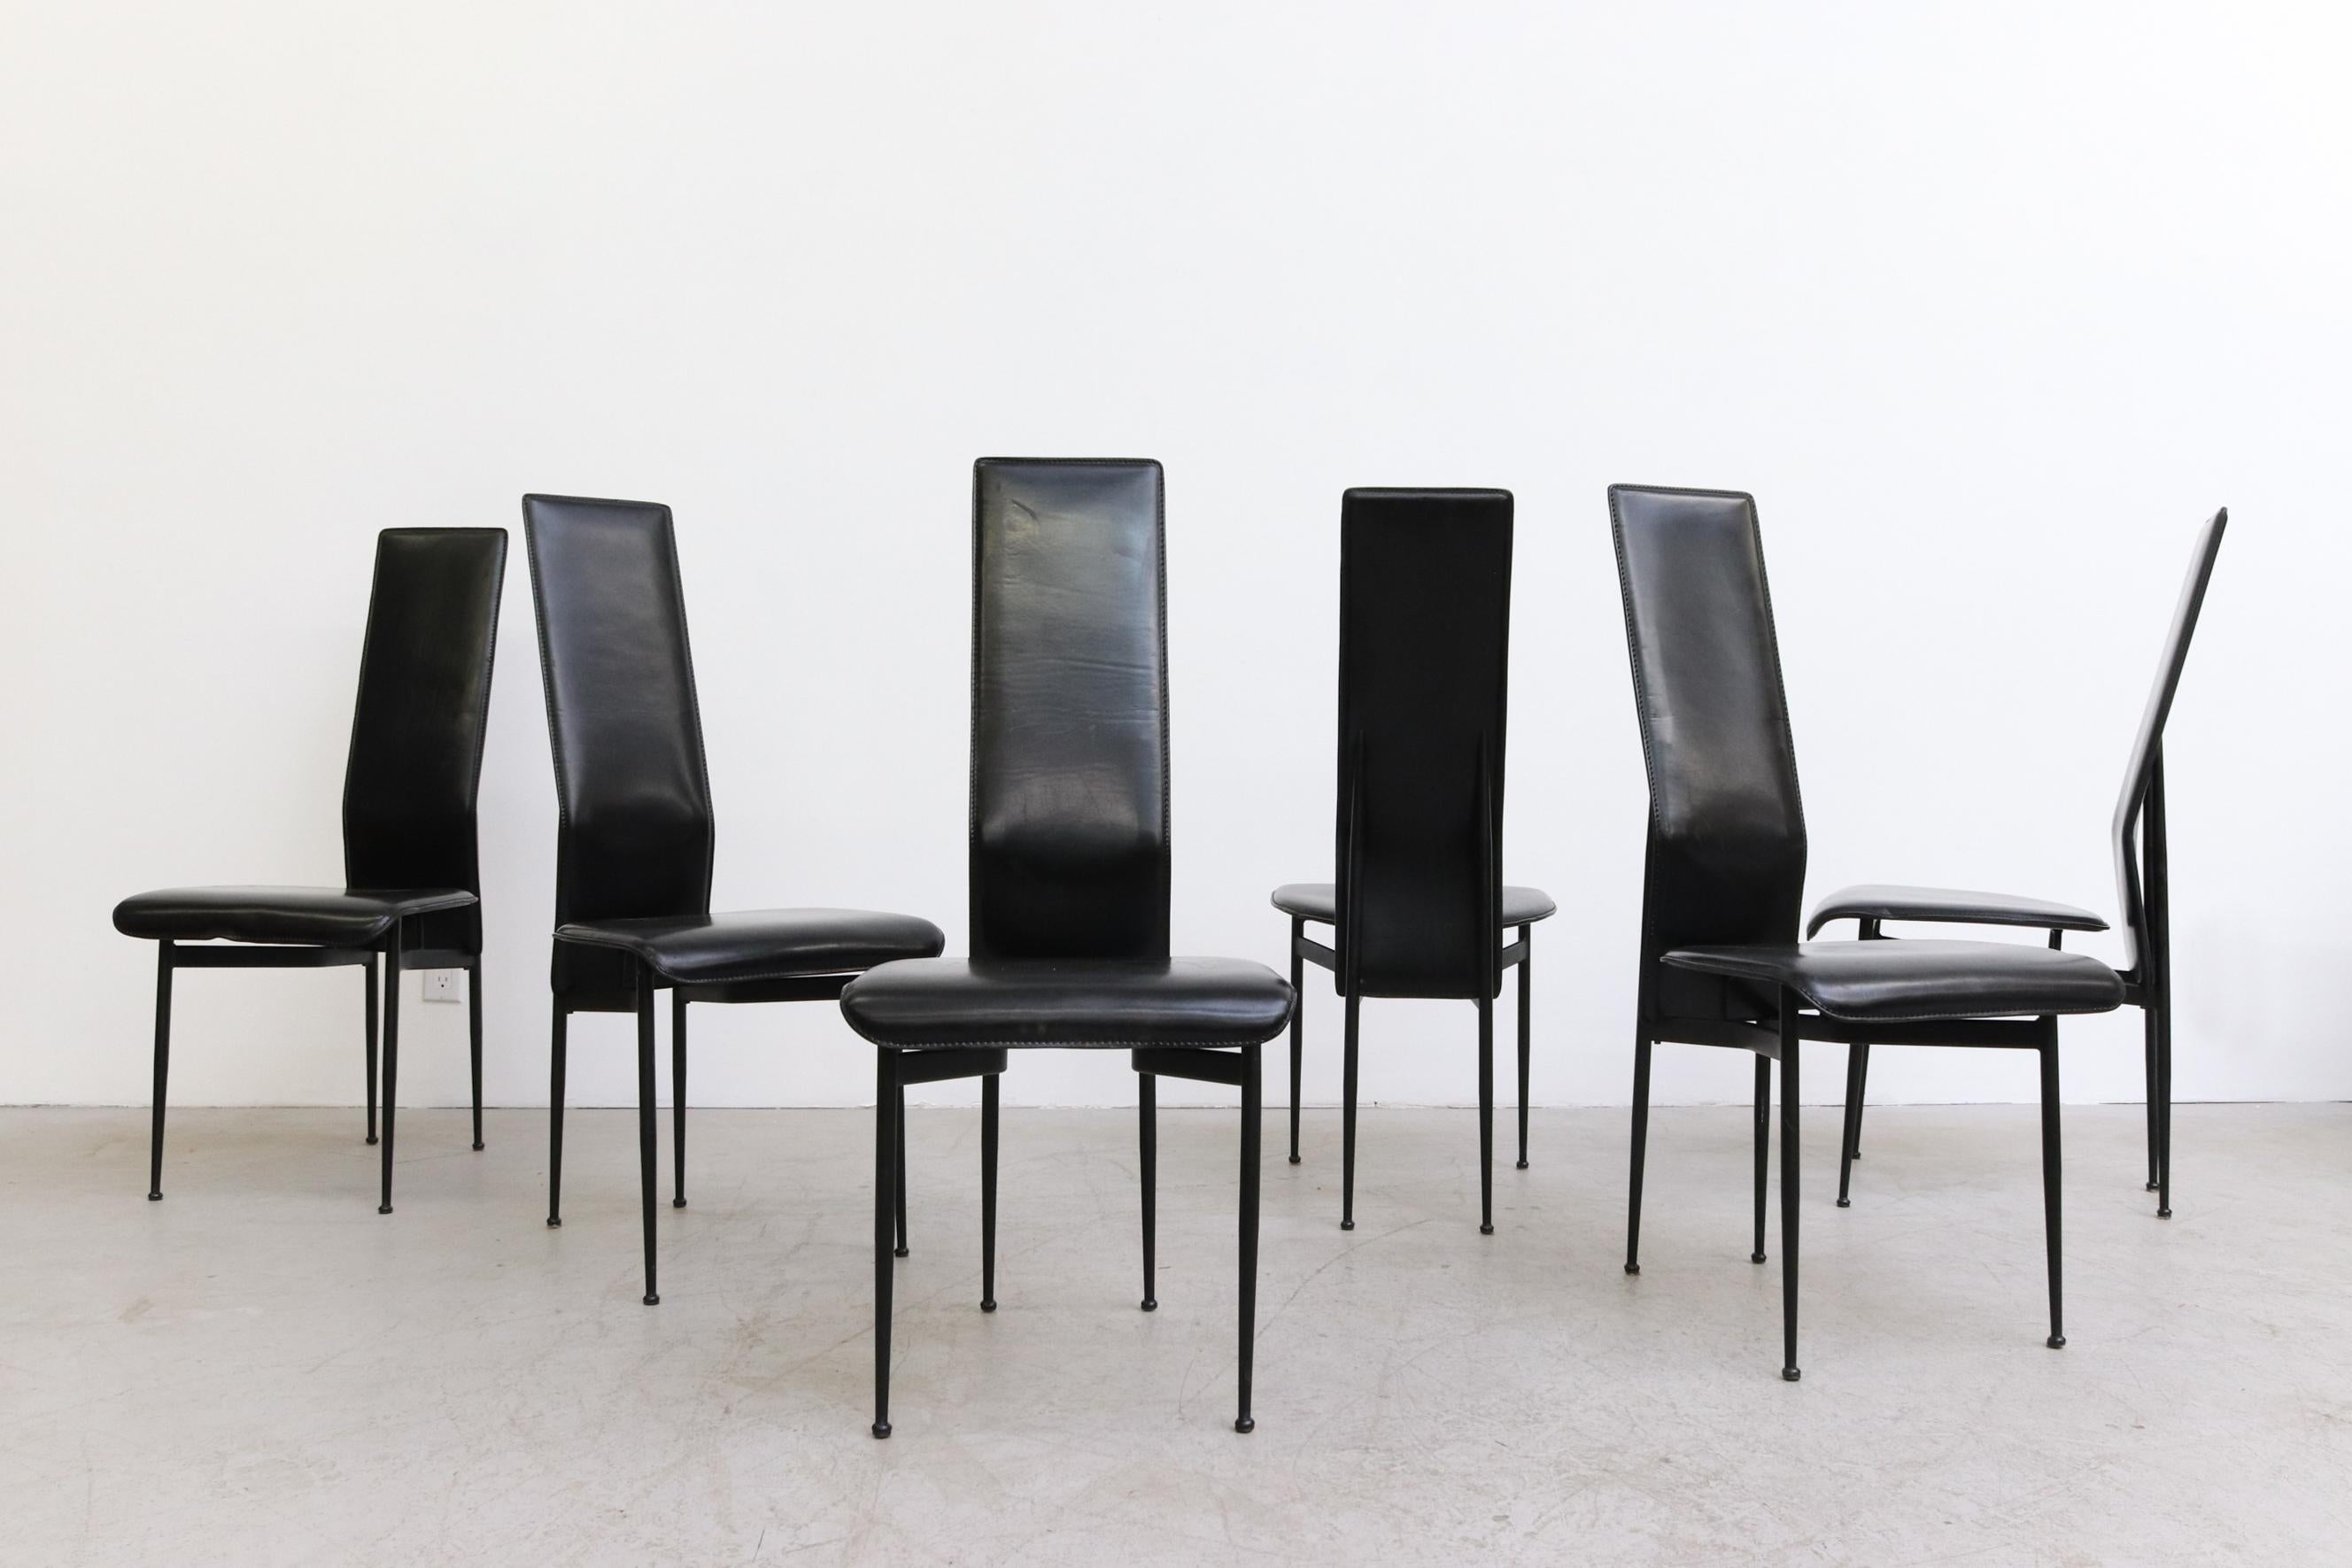 1980's Set of 6 'S44' Dining Chairs by Giancarlo Vegni & Gianfranco Gualtierotti for Fasem. High back, black leather with black frame. In original condition with visible wear, including some denting and scratching to leather. Wear is consistent with